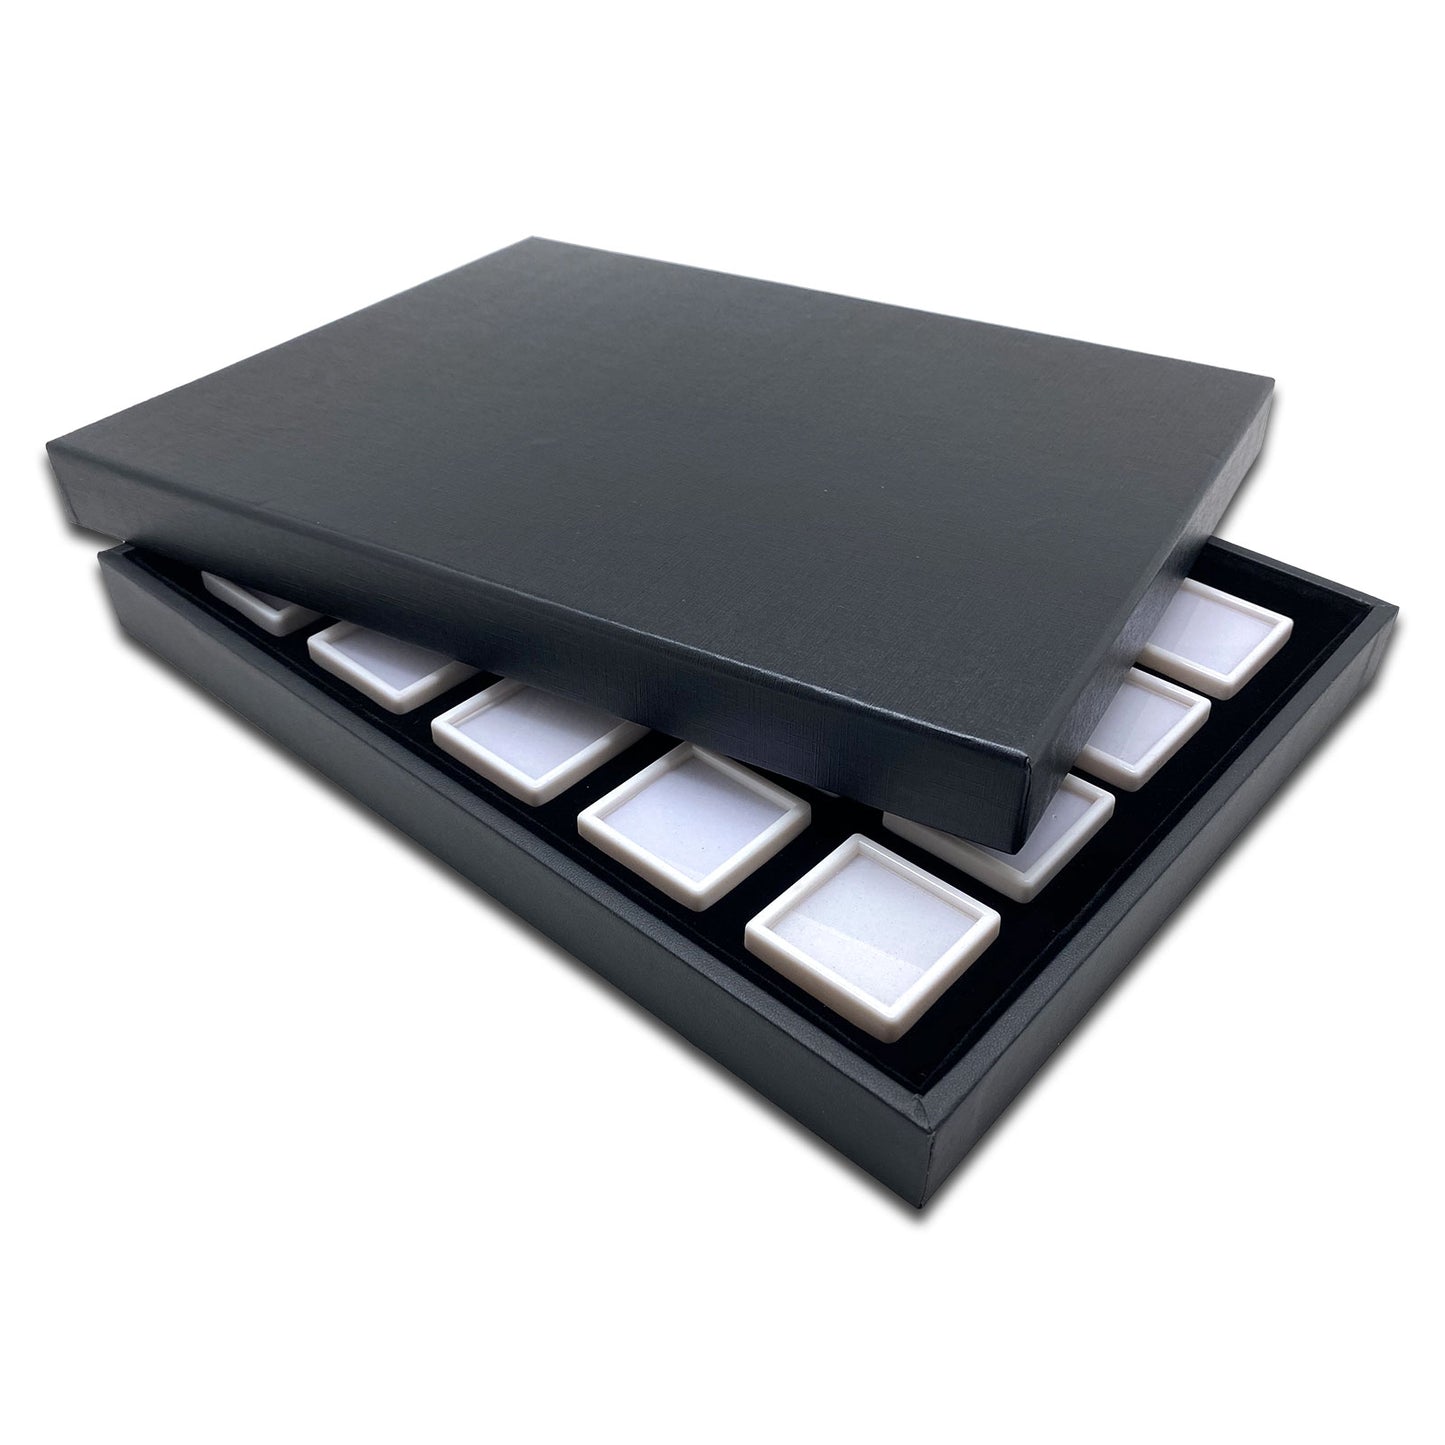 20 White Gem Boxes with Black Wood Tray and Lid